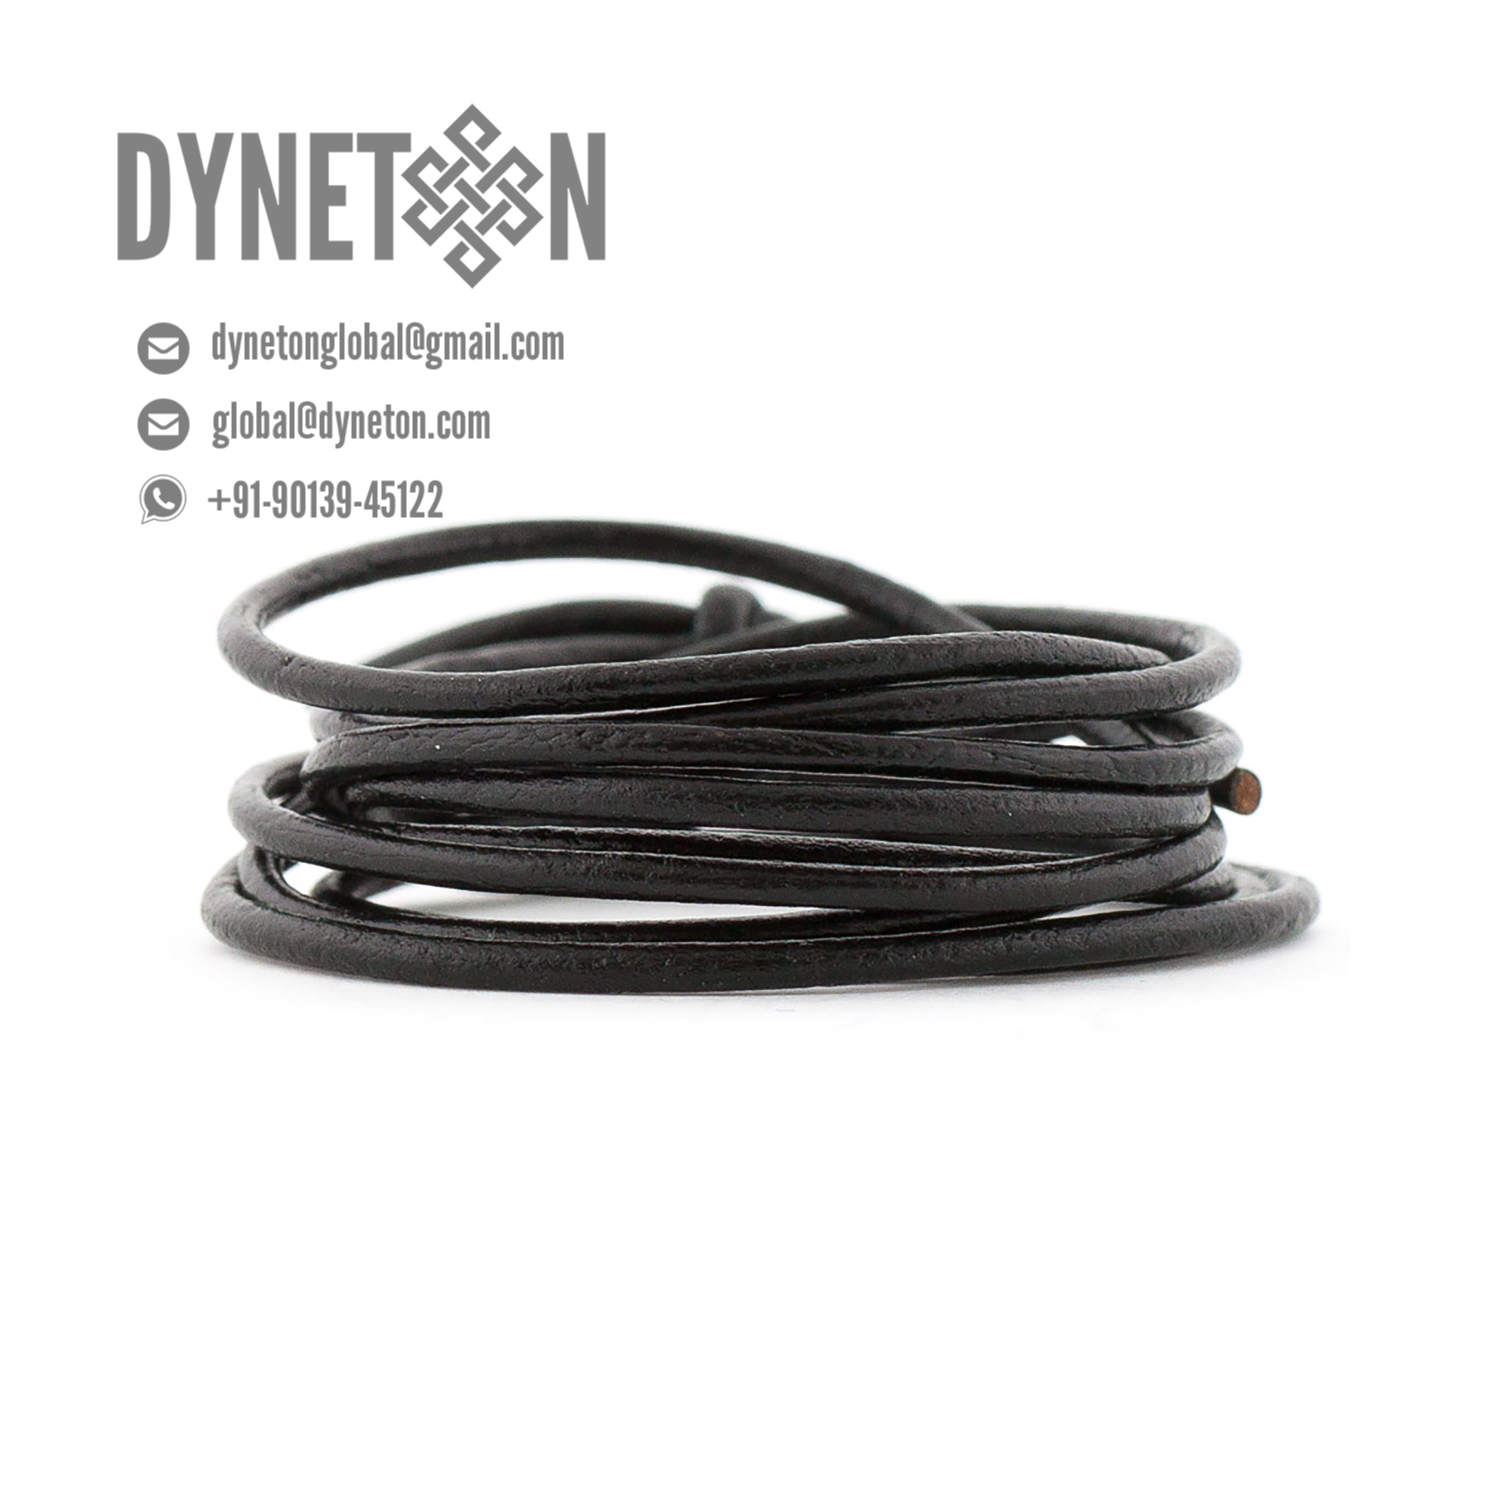 4mm Round Leather Cord - DYNETON / Round Leather Cords 4 mm